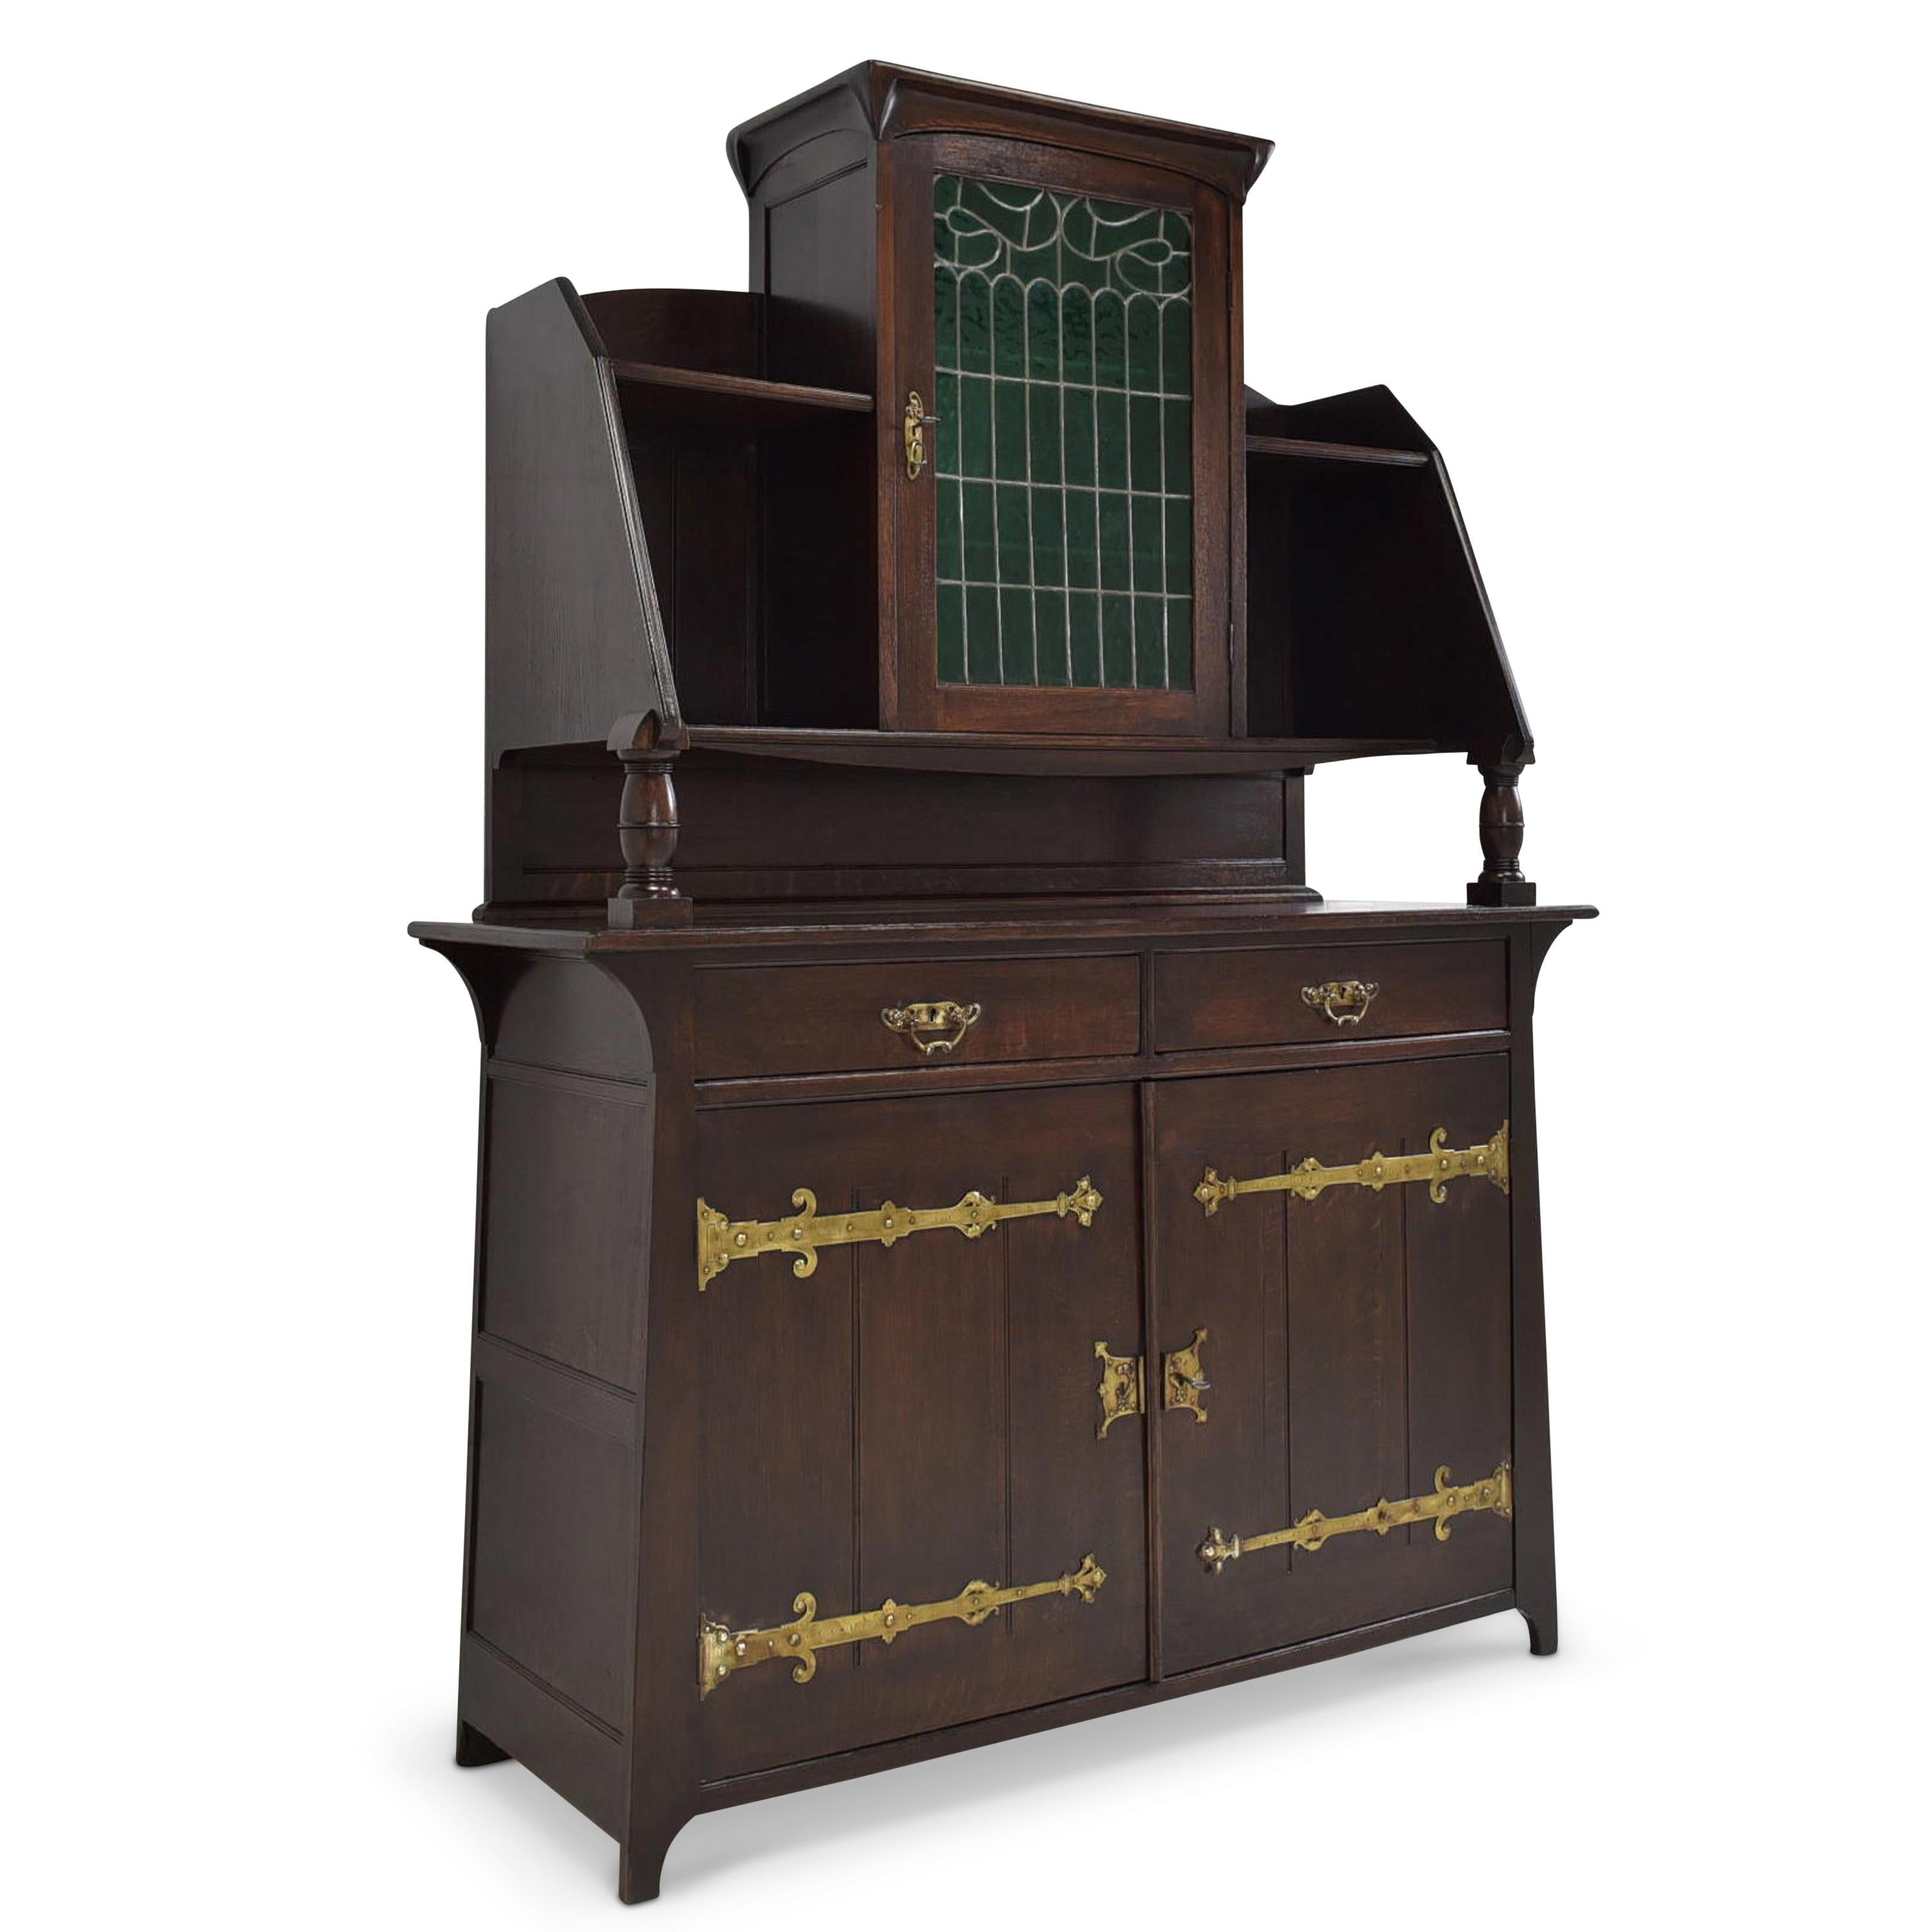 Buffet cabinet restored Jugendstil Art Nouveau around 1920 solid oak

Features:
Single-door top with open compartments on double-door base with two drawers
High quality
Drawers pronged
Original fittings
Original stained glass
Organically